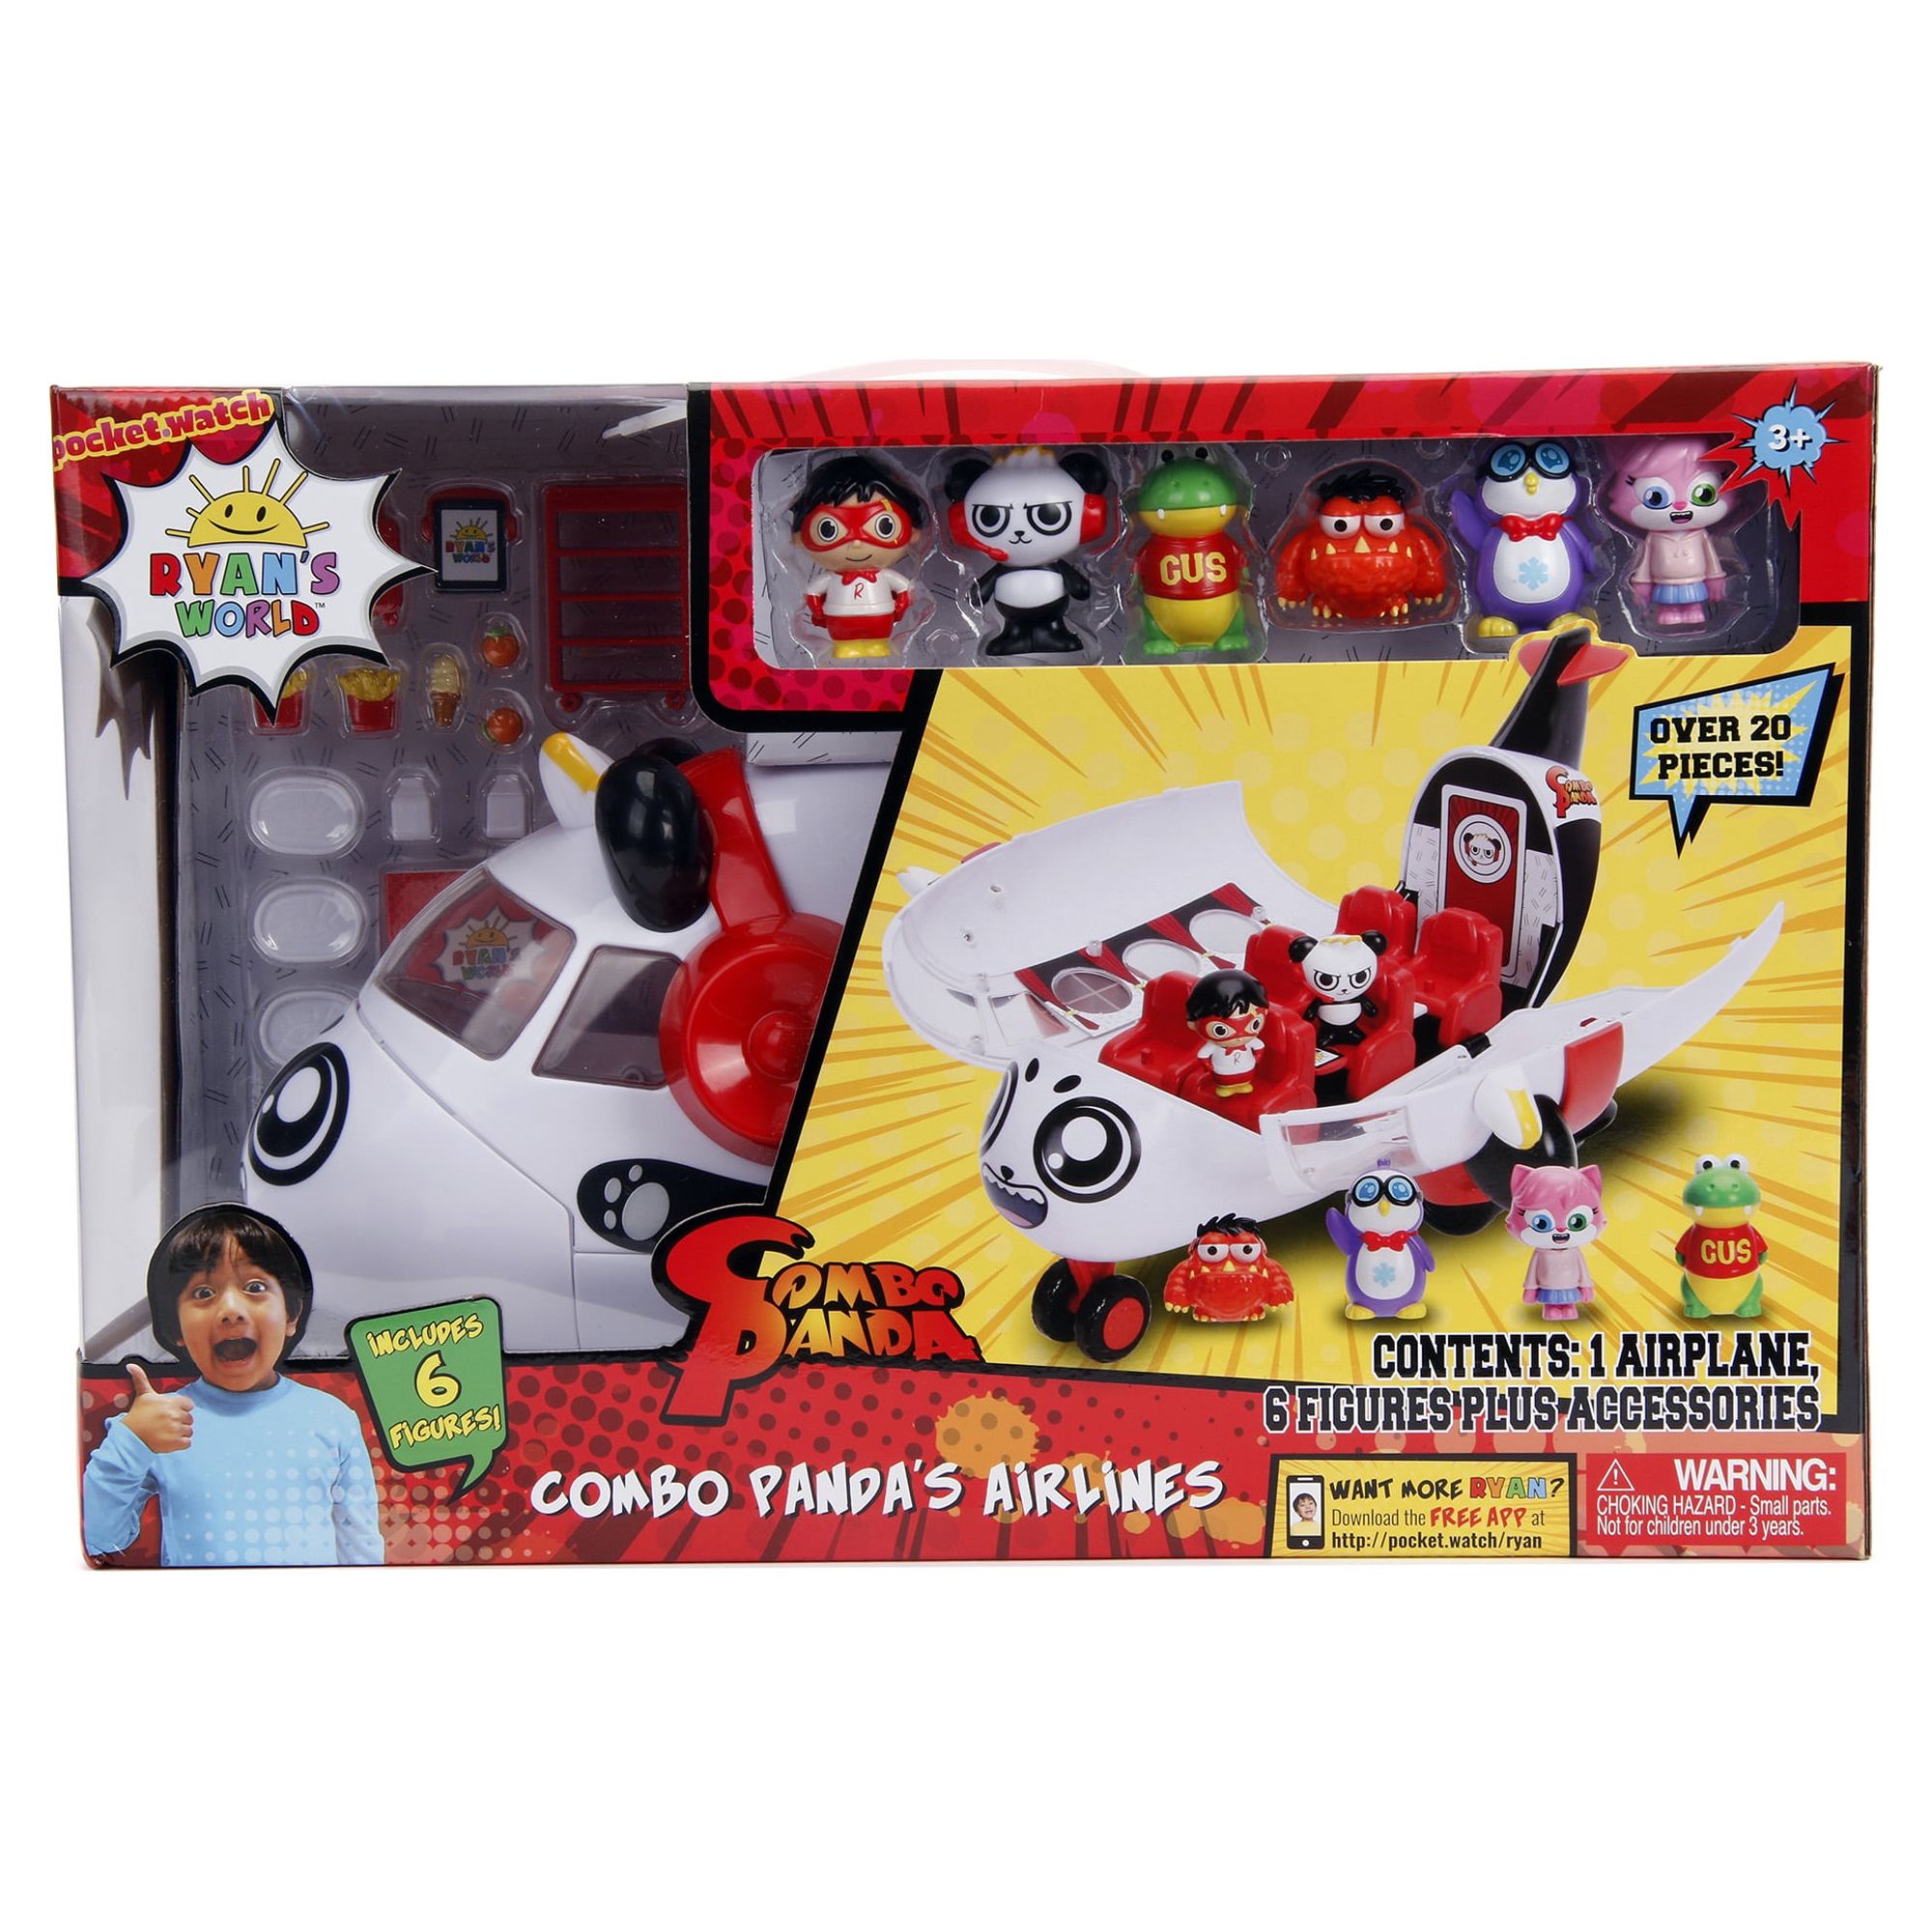 Jada Toys Ryan's World Multi-color Panda Airplane Set with 6 Figures, for Children 3+ Years - image 2 of 2